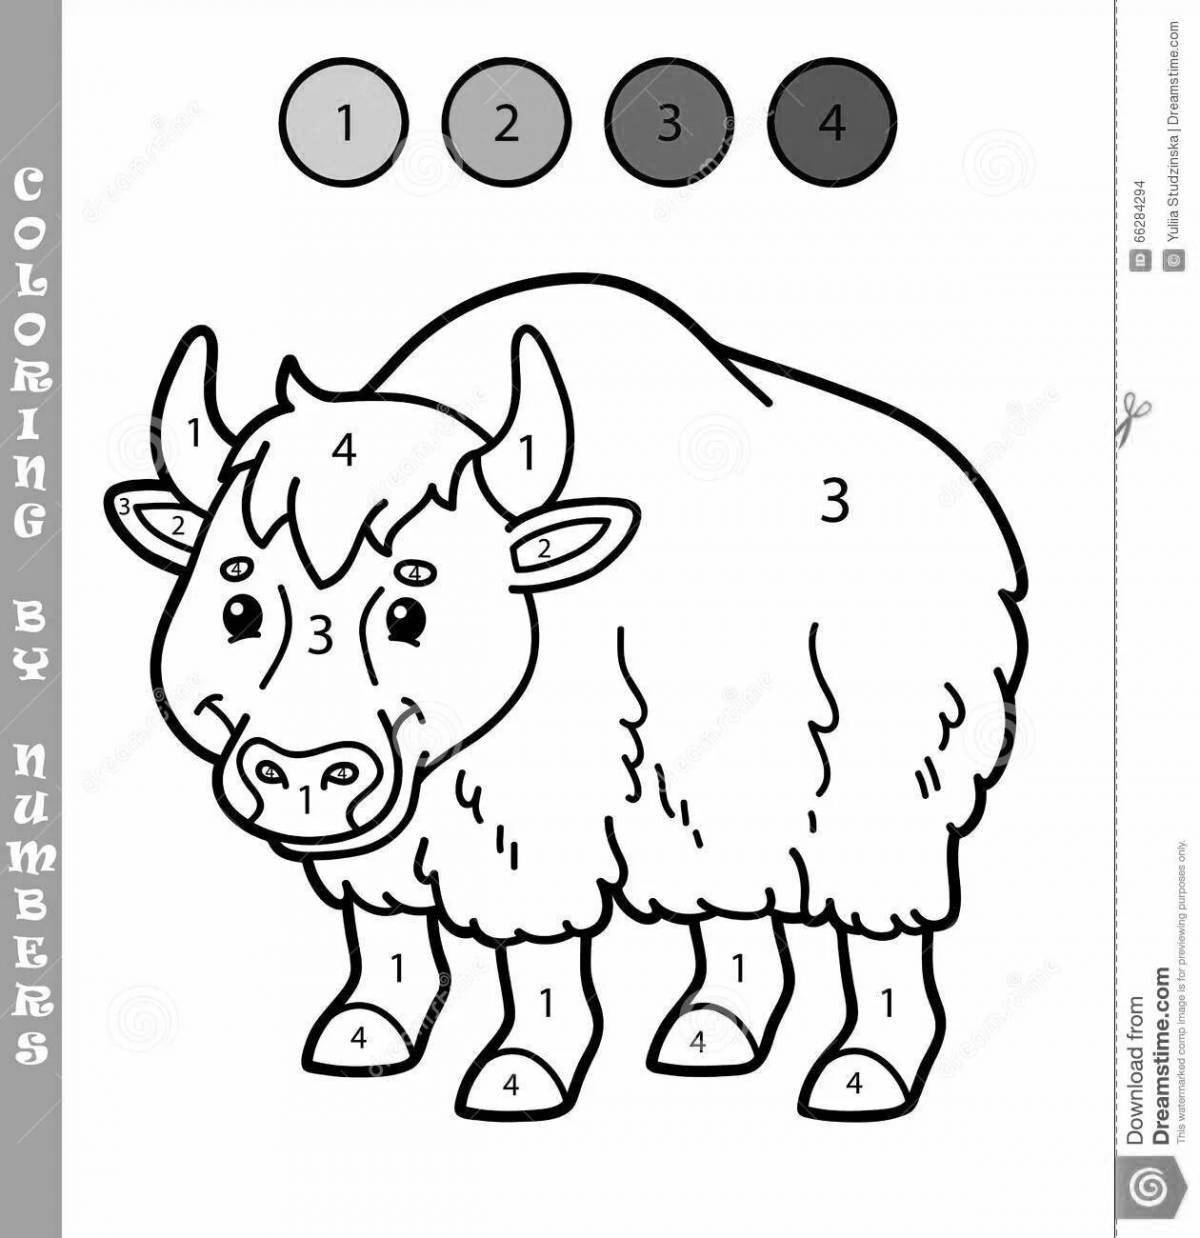 Delightful yak coloring book for kids